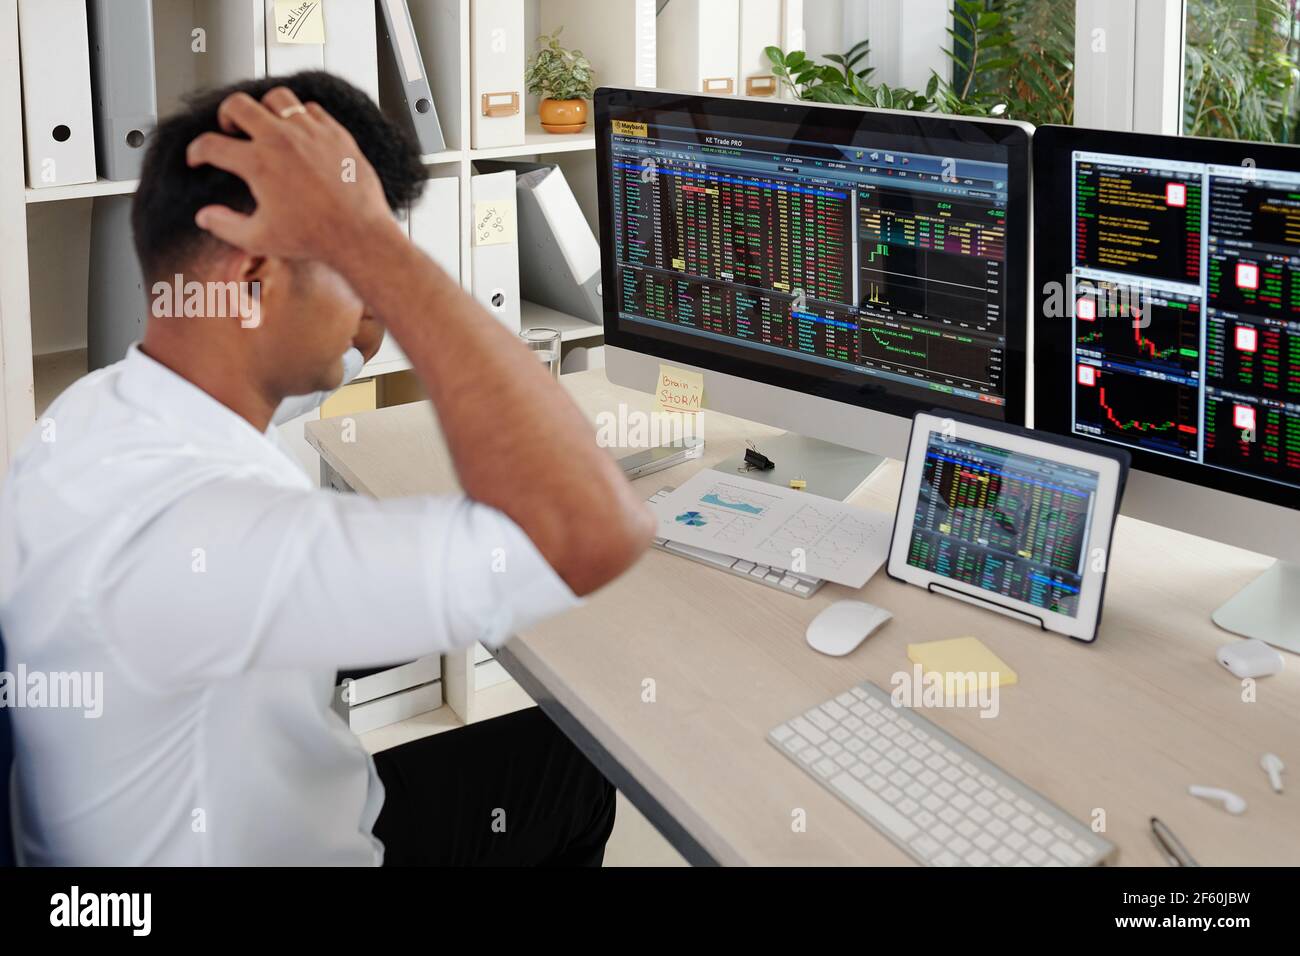 Stressed trader touching head when looking at computer screens with stock market data Stock Photo